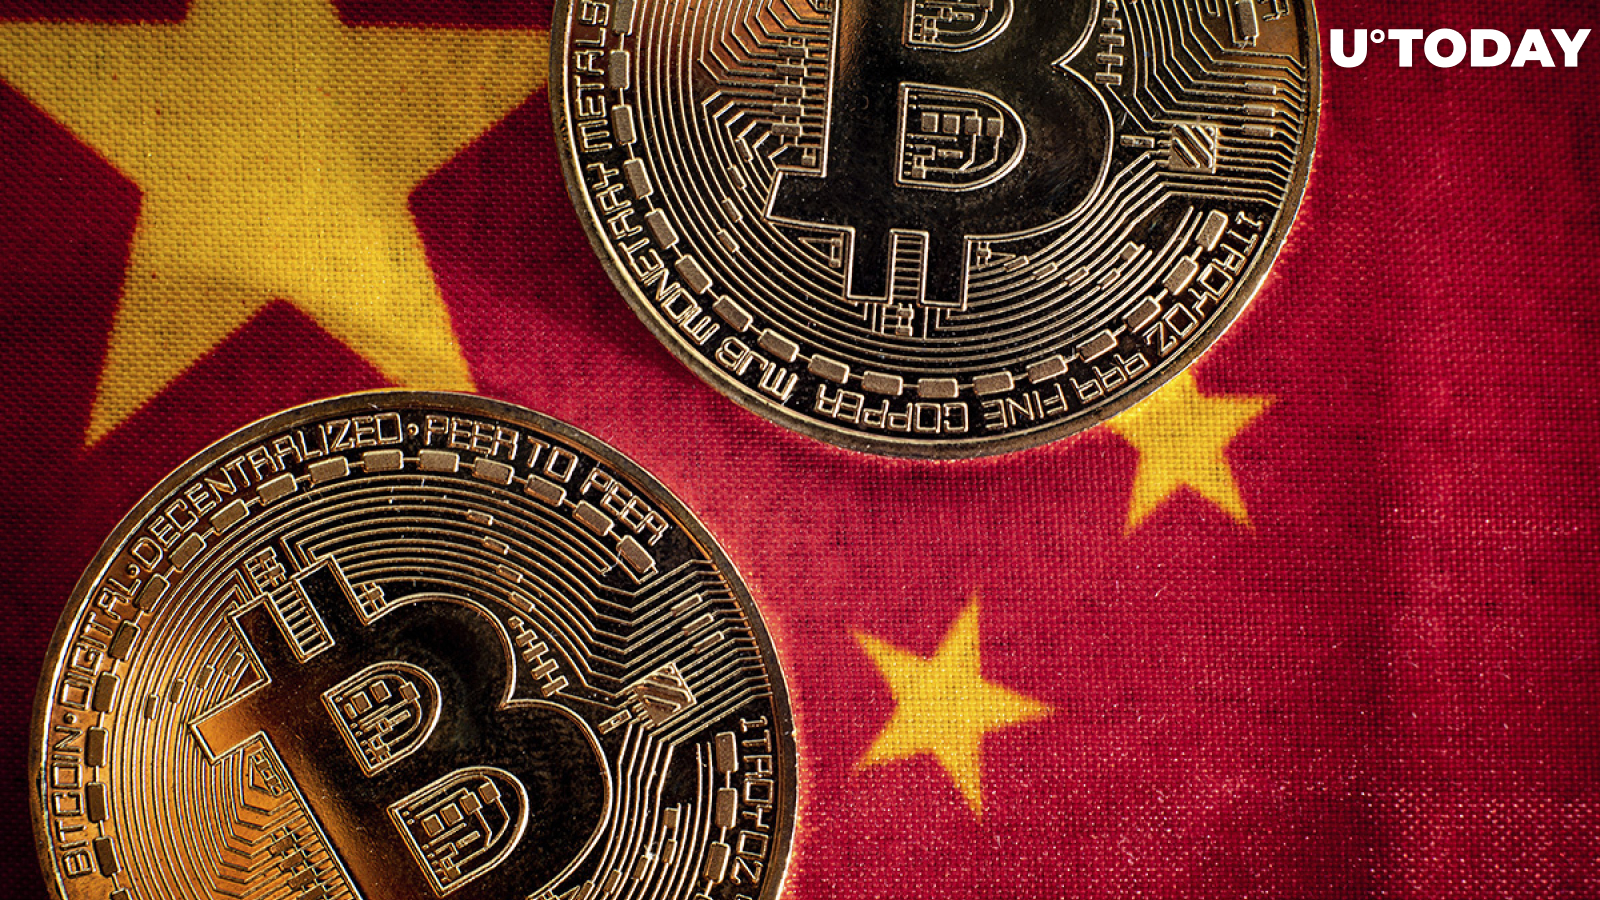 Bitcoin May Gain Long-Term Boost From Current Chinese Crypto Ban: Bloomberg’s Mike McGlone